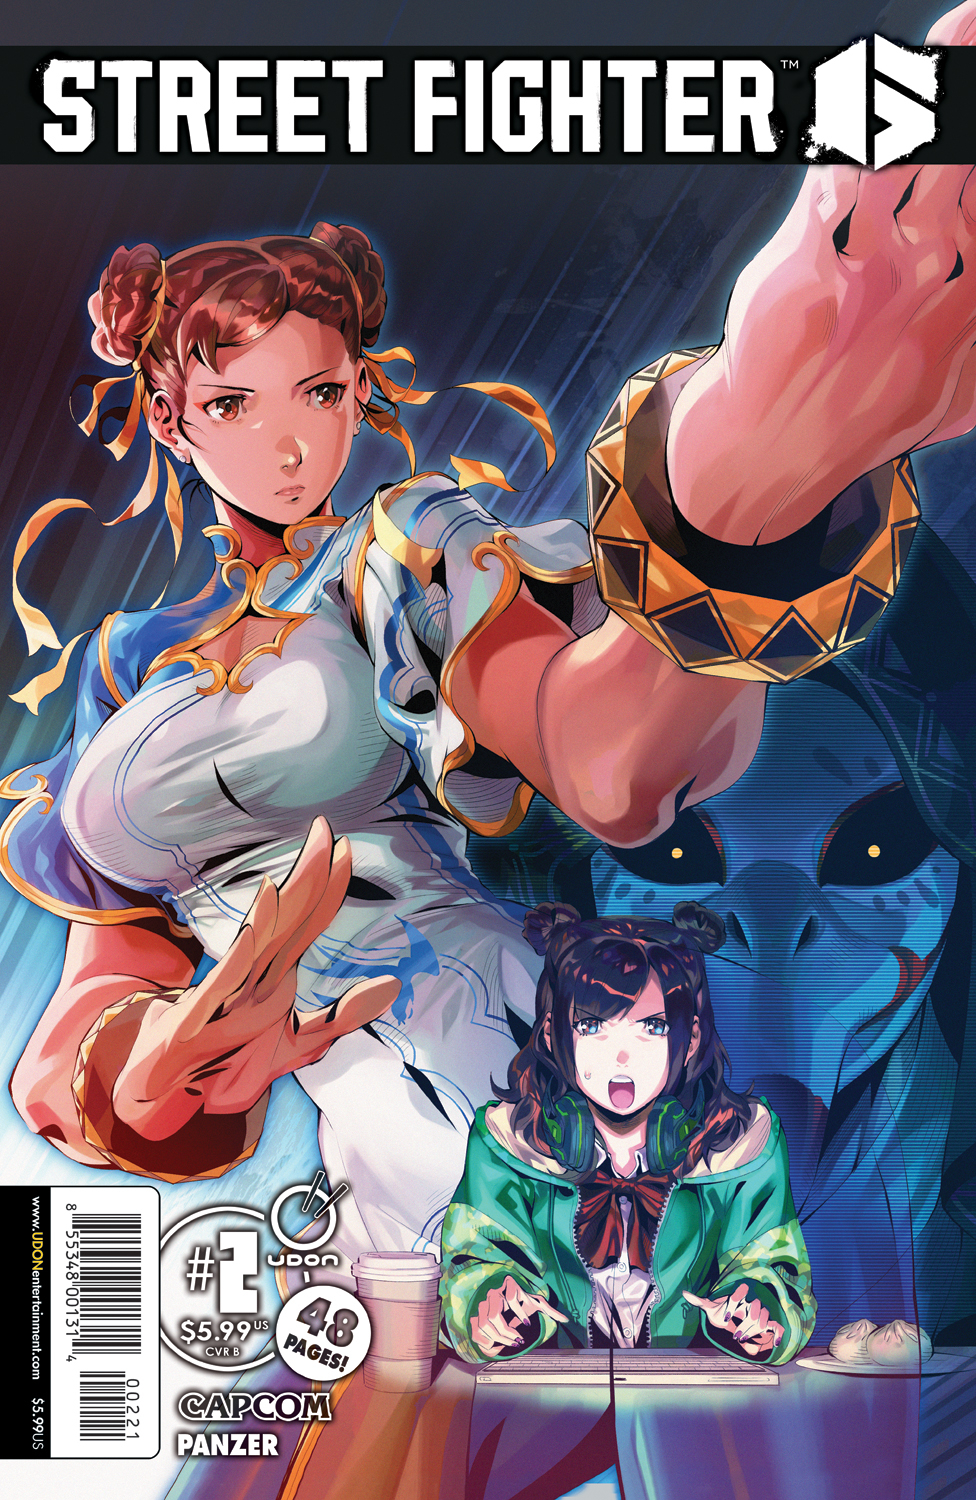 Street Fighter 6 #2 Cover B Panzer (Of 4)